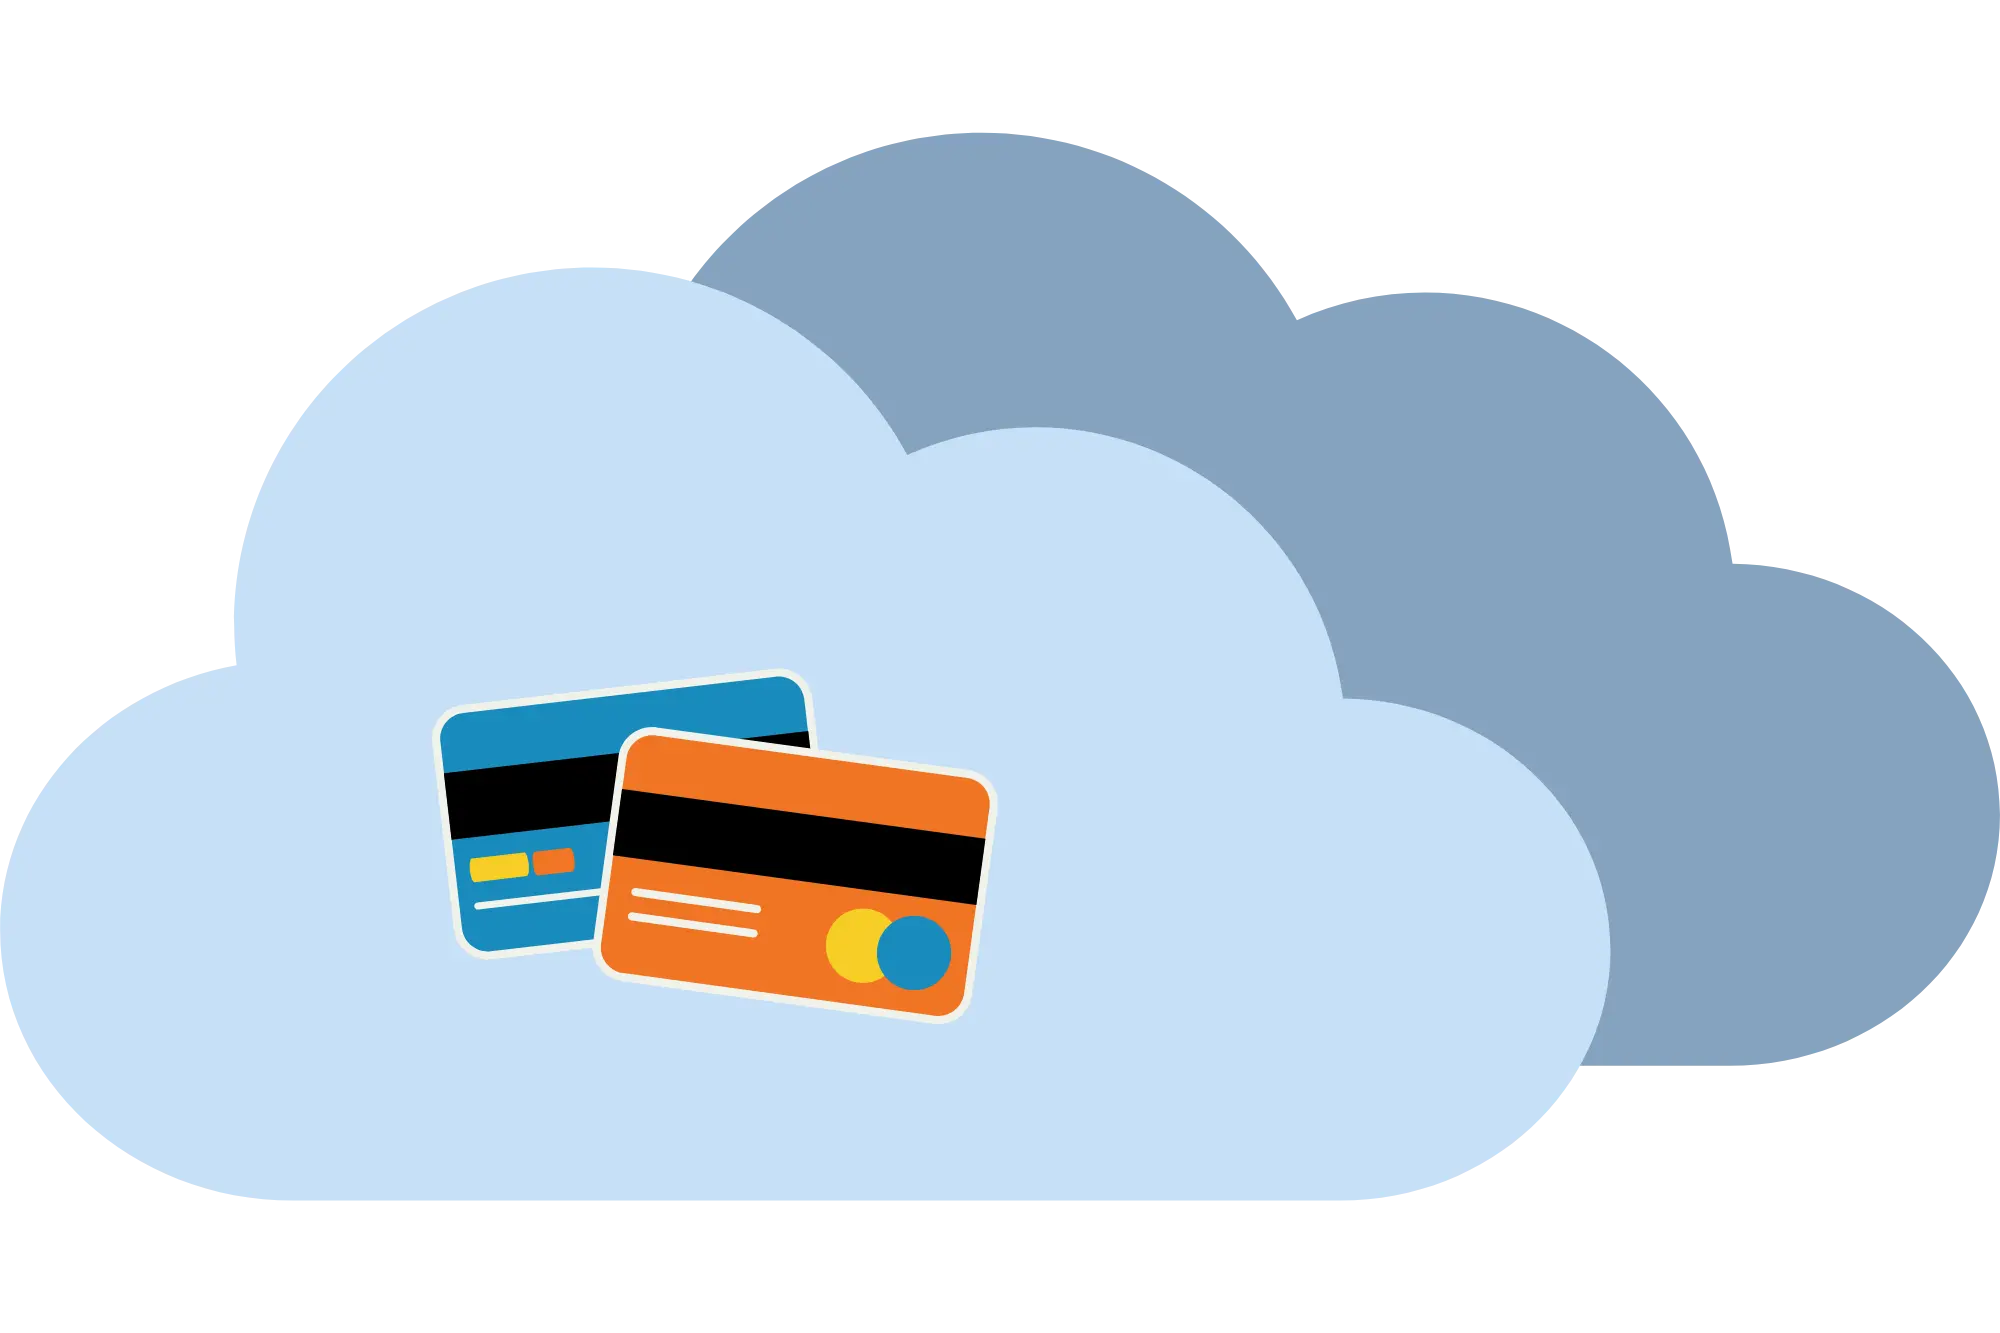 A cloud with two credit cards in it, representing venmo business and personal accounts